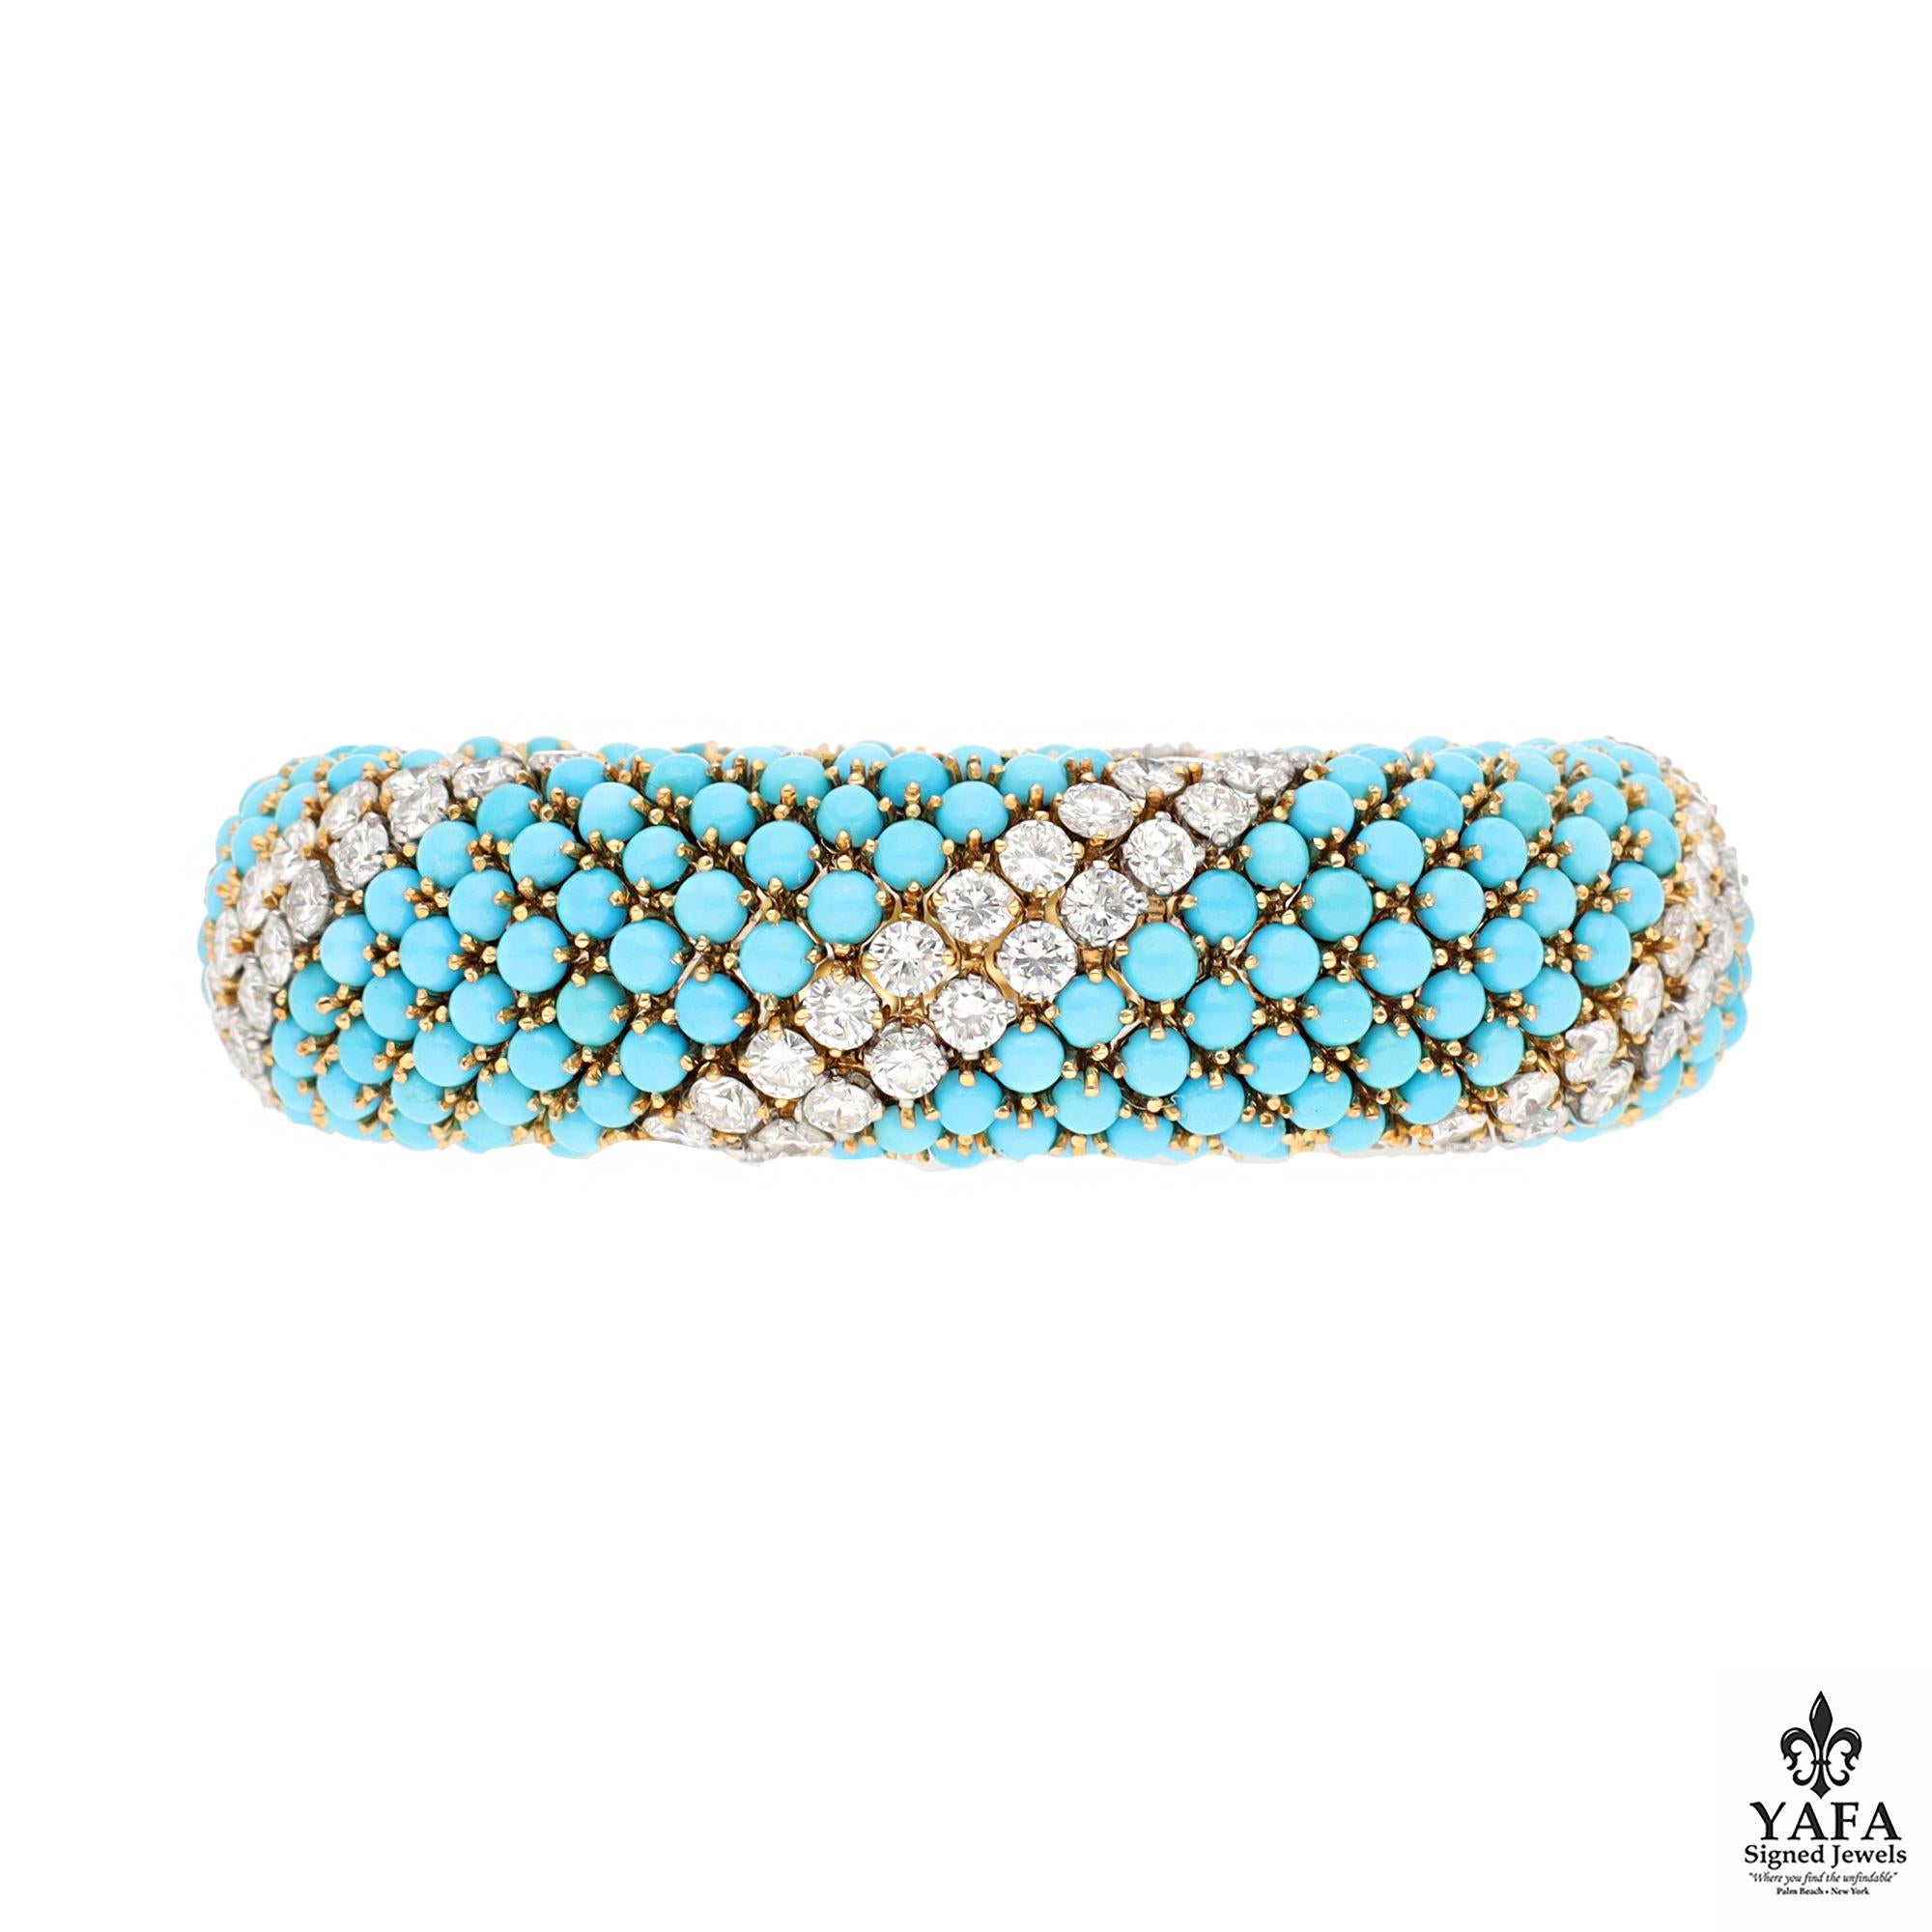 18K Yellow Gold Turquoise and Diamond Bracelet with alternating sections of multiple rows of Diamonds and Turquoise. French Assay Marks. Approximately circumference 6.25